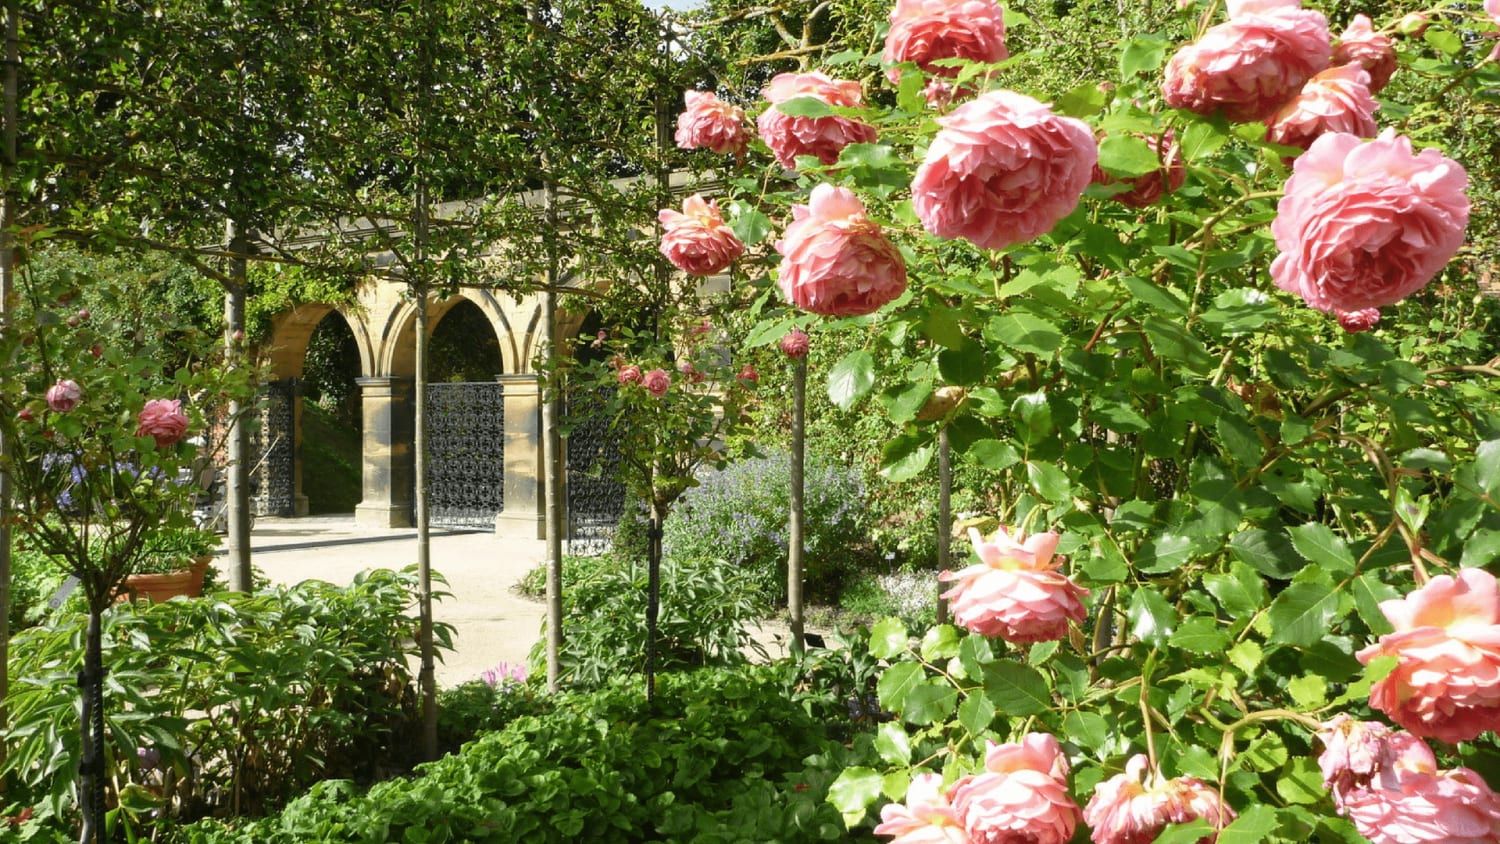 Finding inspiration from some of Britain’s most beautiful gardens *